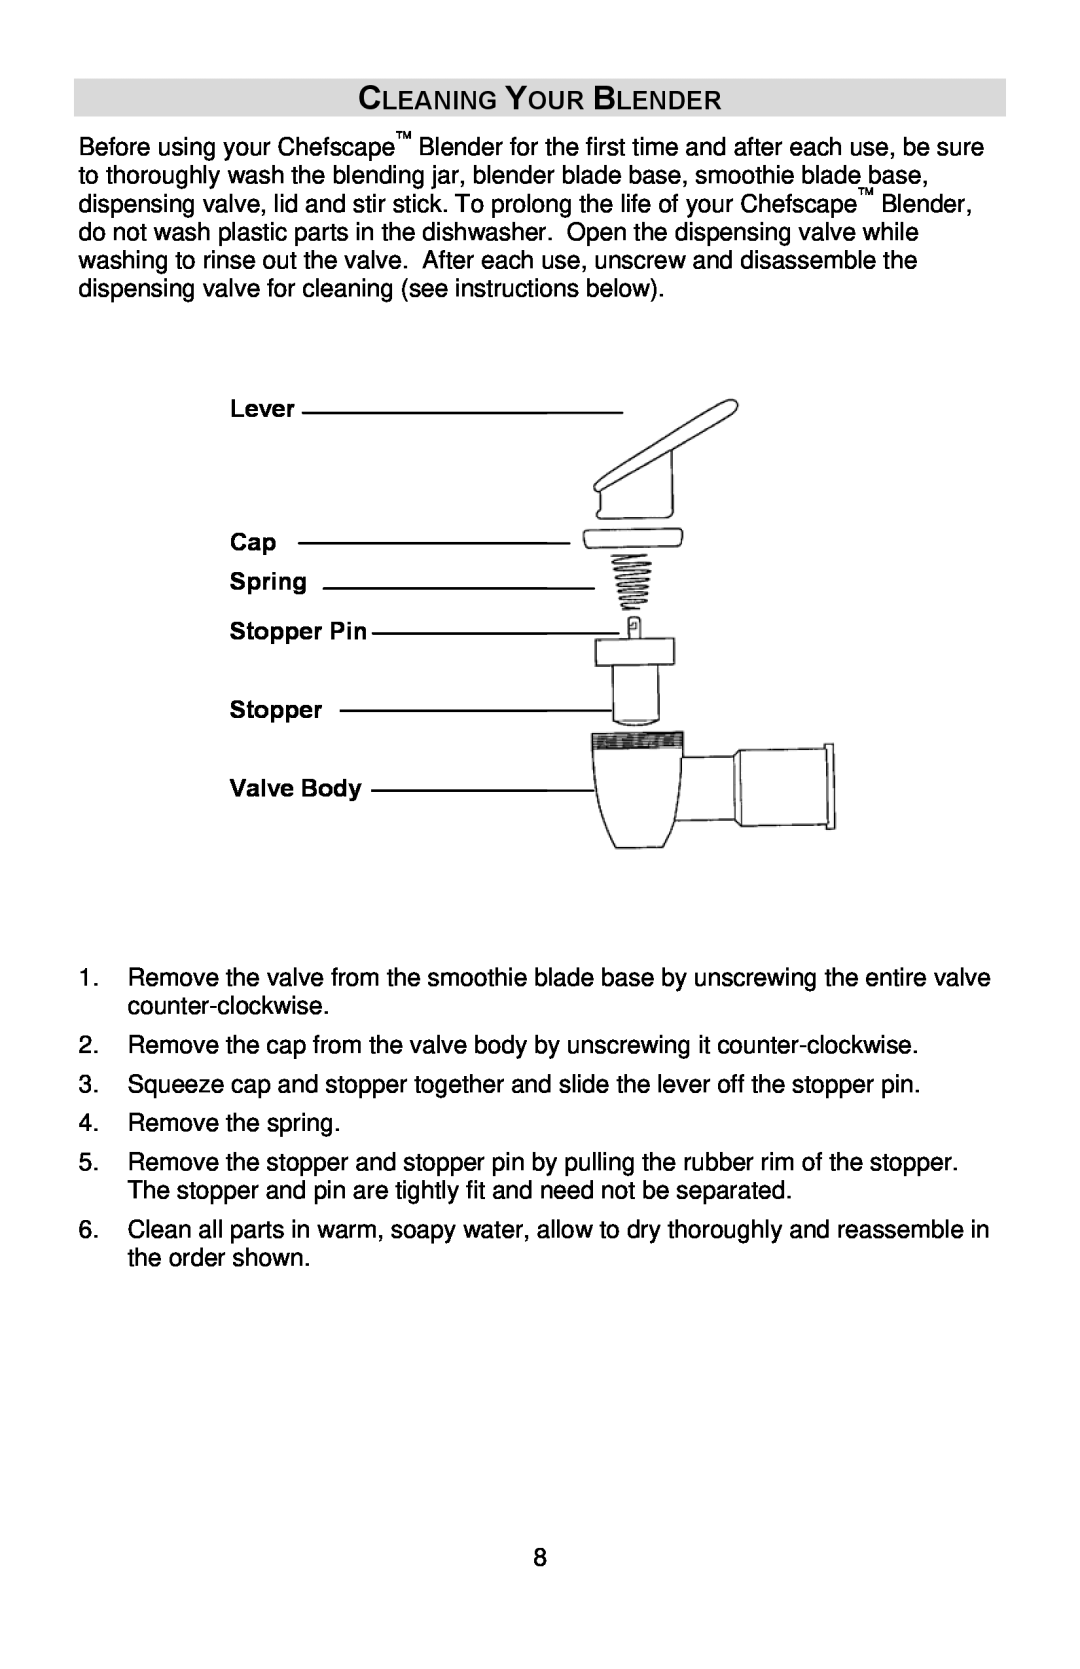 West Bend PBL1000, L5746 instruction manual Cleaning Your Blender, Lever Cap Spring Stopper Pin Stopper Valve Body 